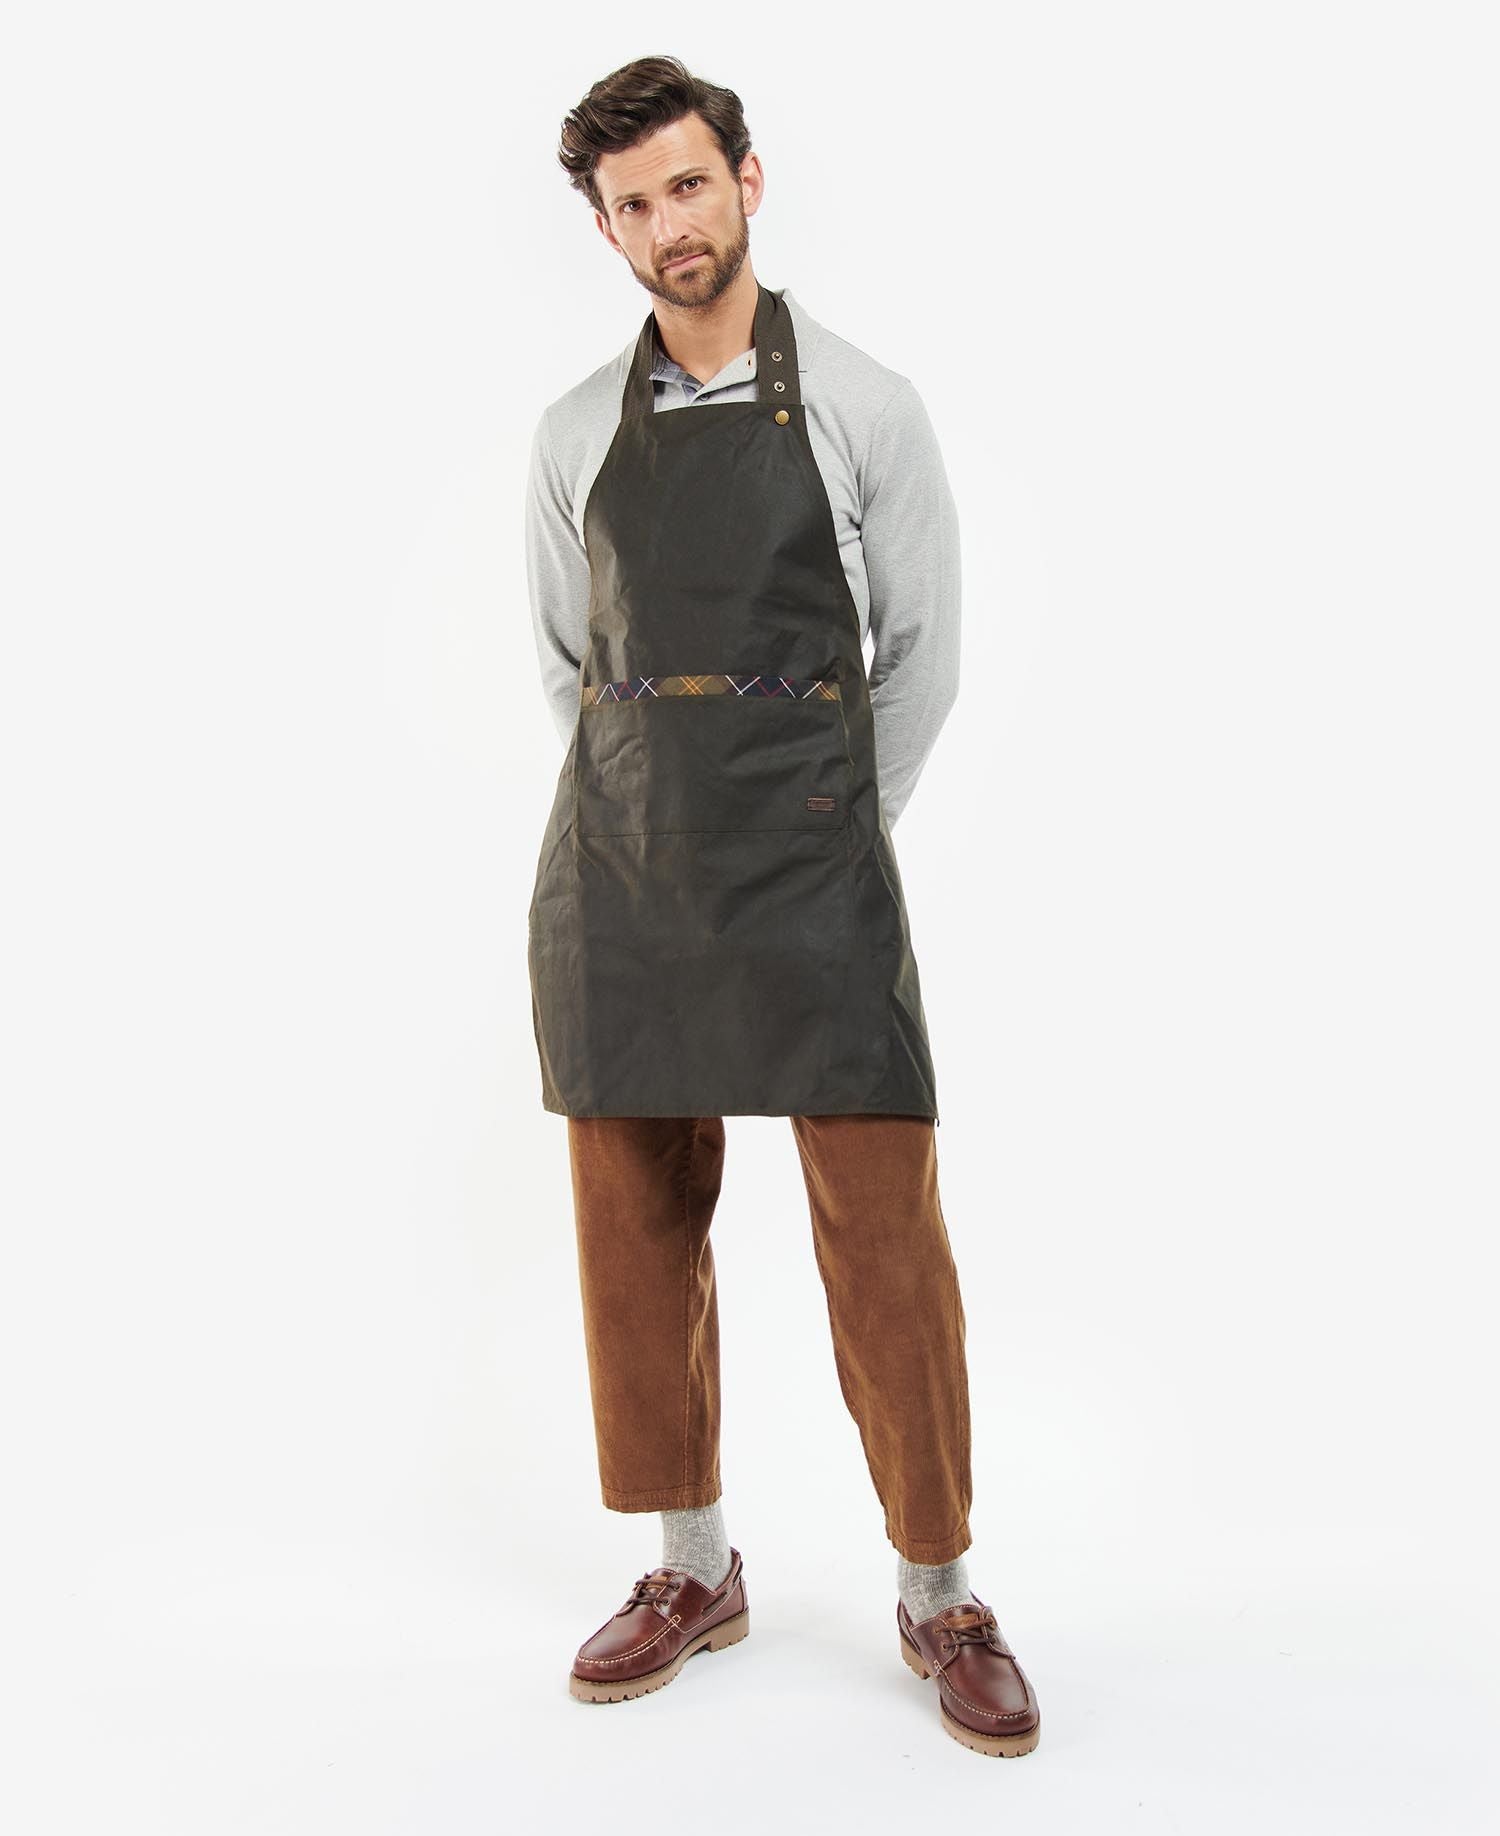 Barbour Wax For Life Apron UAC0263OL71